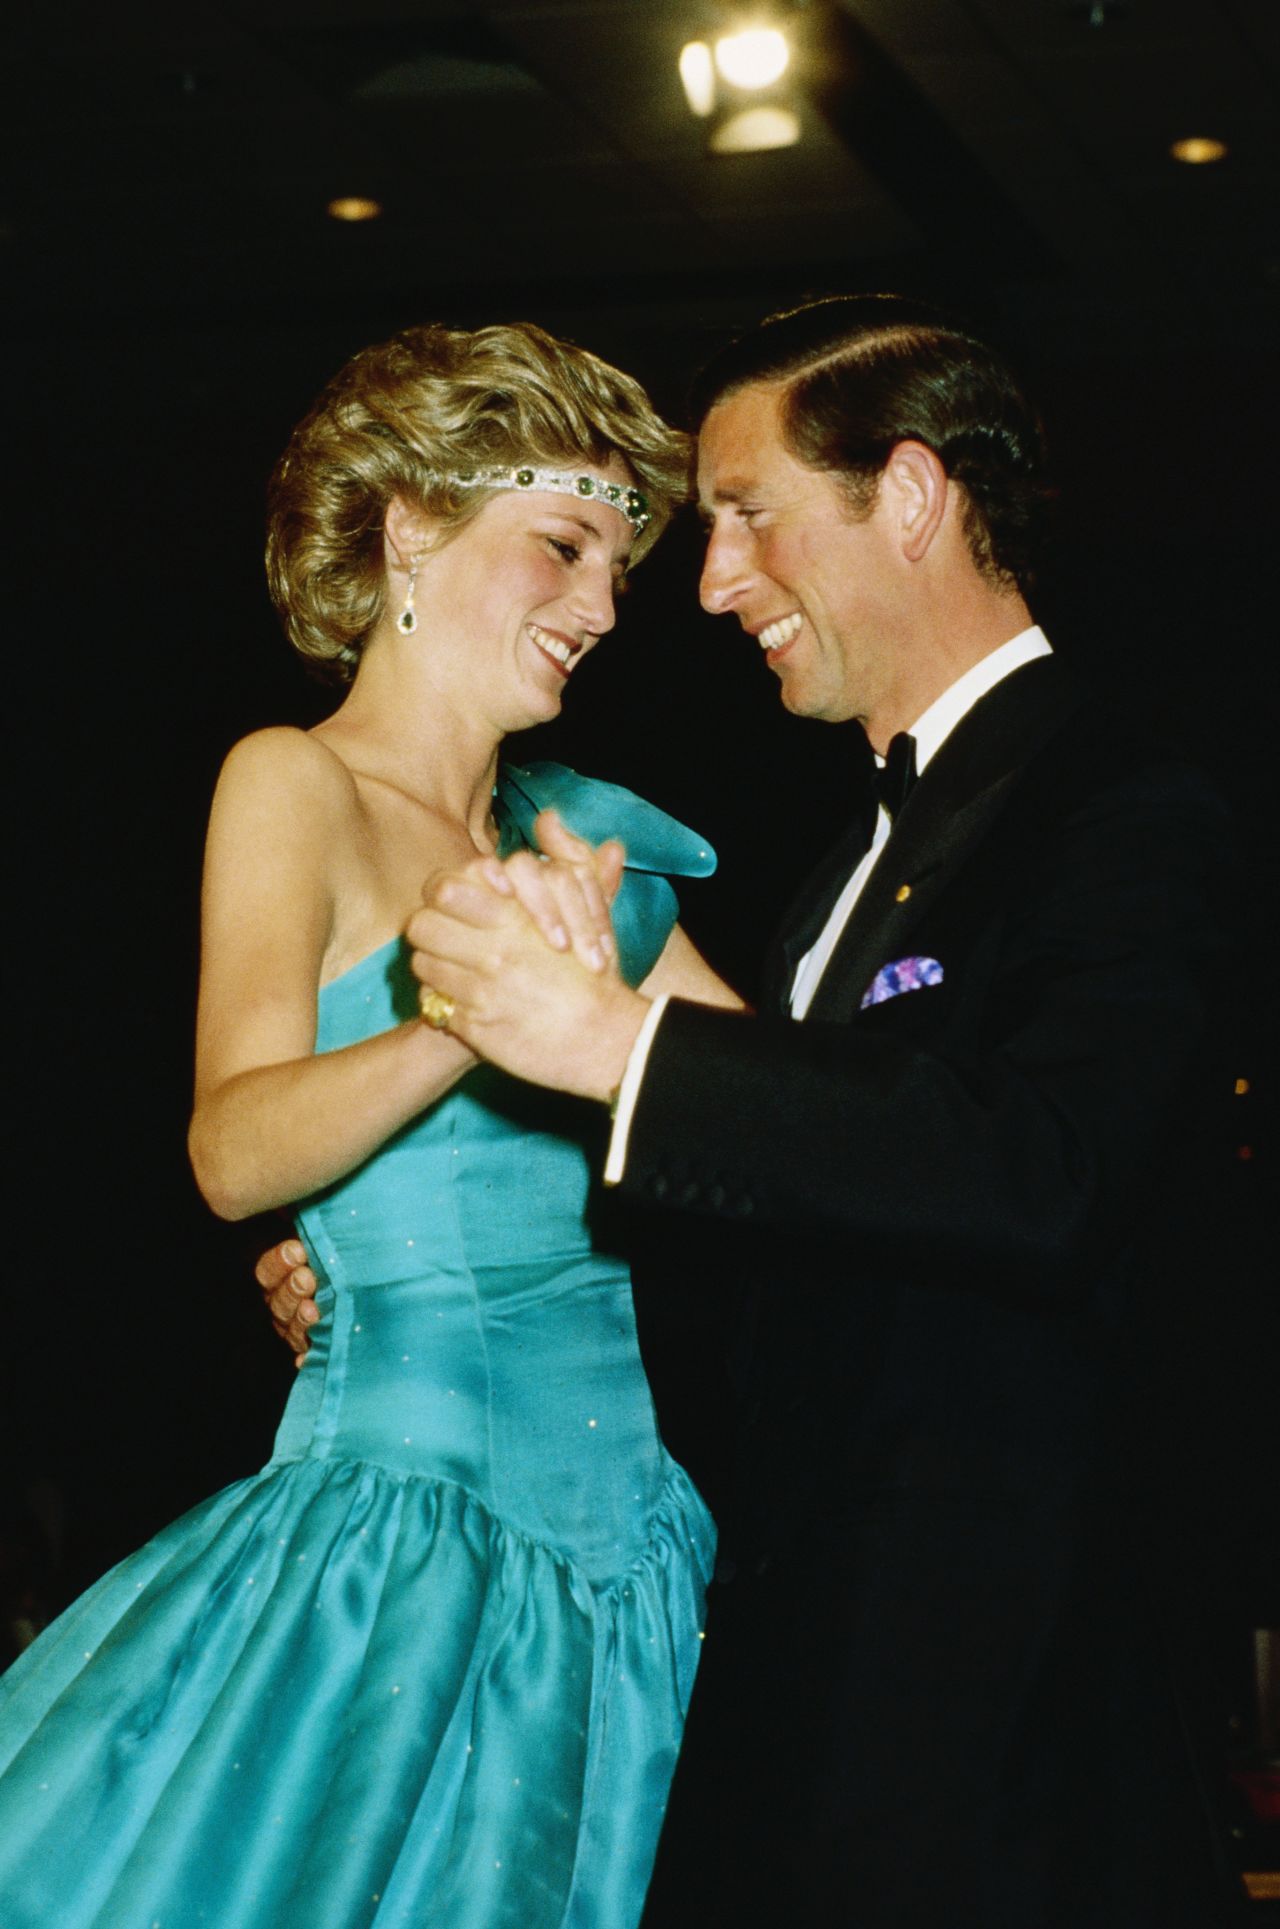 Charles and Diana dance together at a formal event.